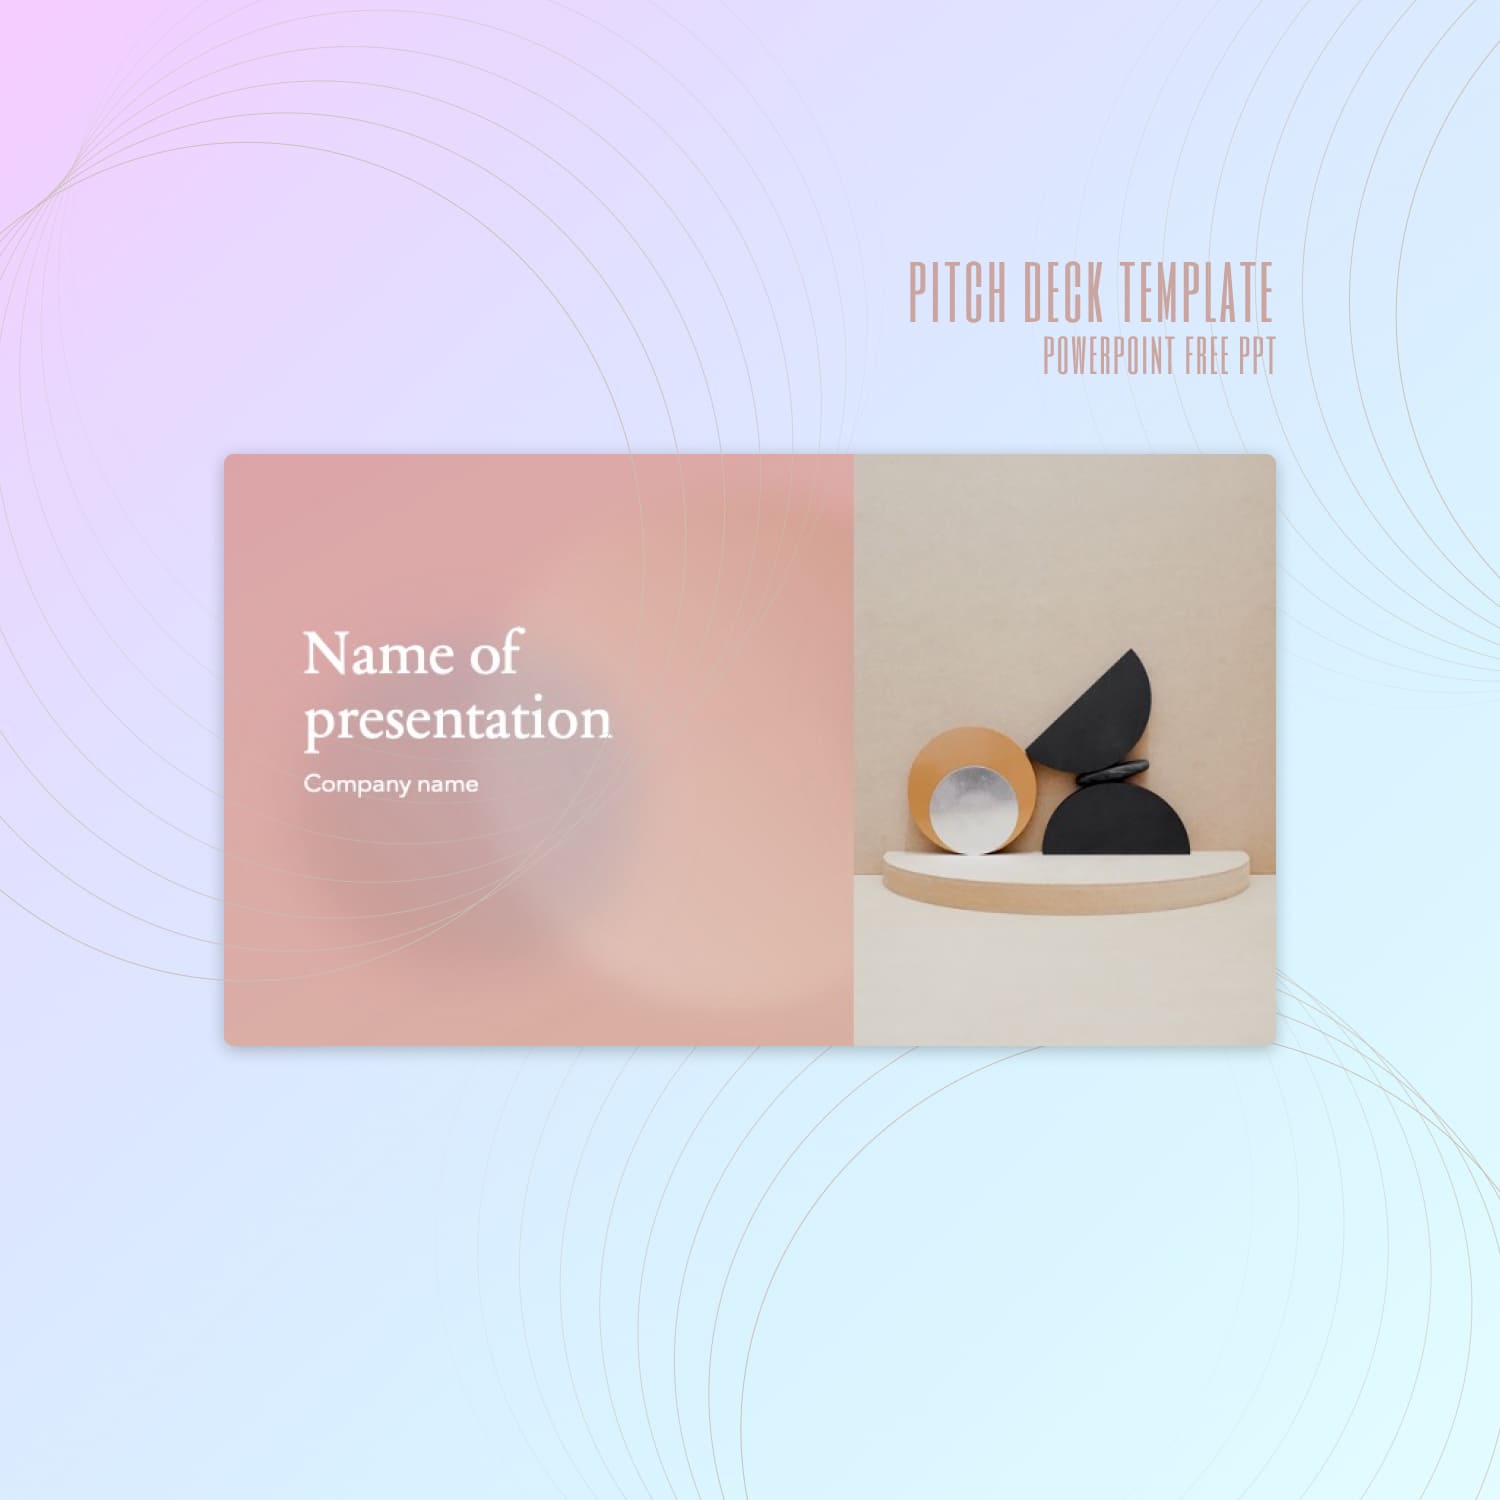 1500 1 Pitch Deck Template Powerpoint Free PPT.